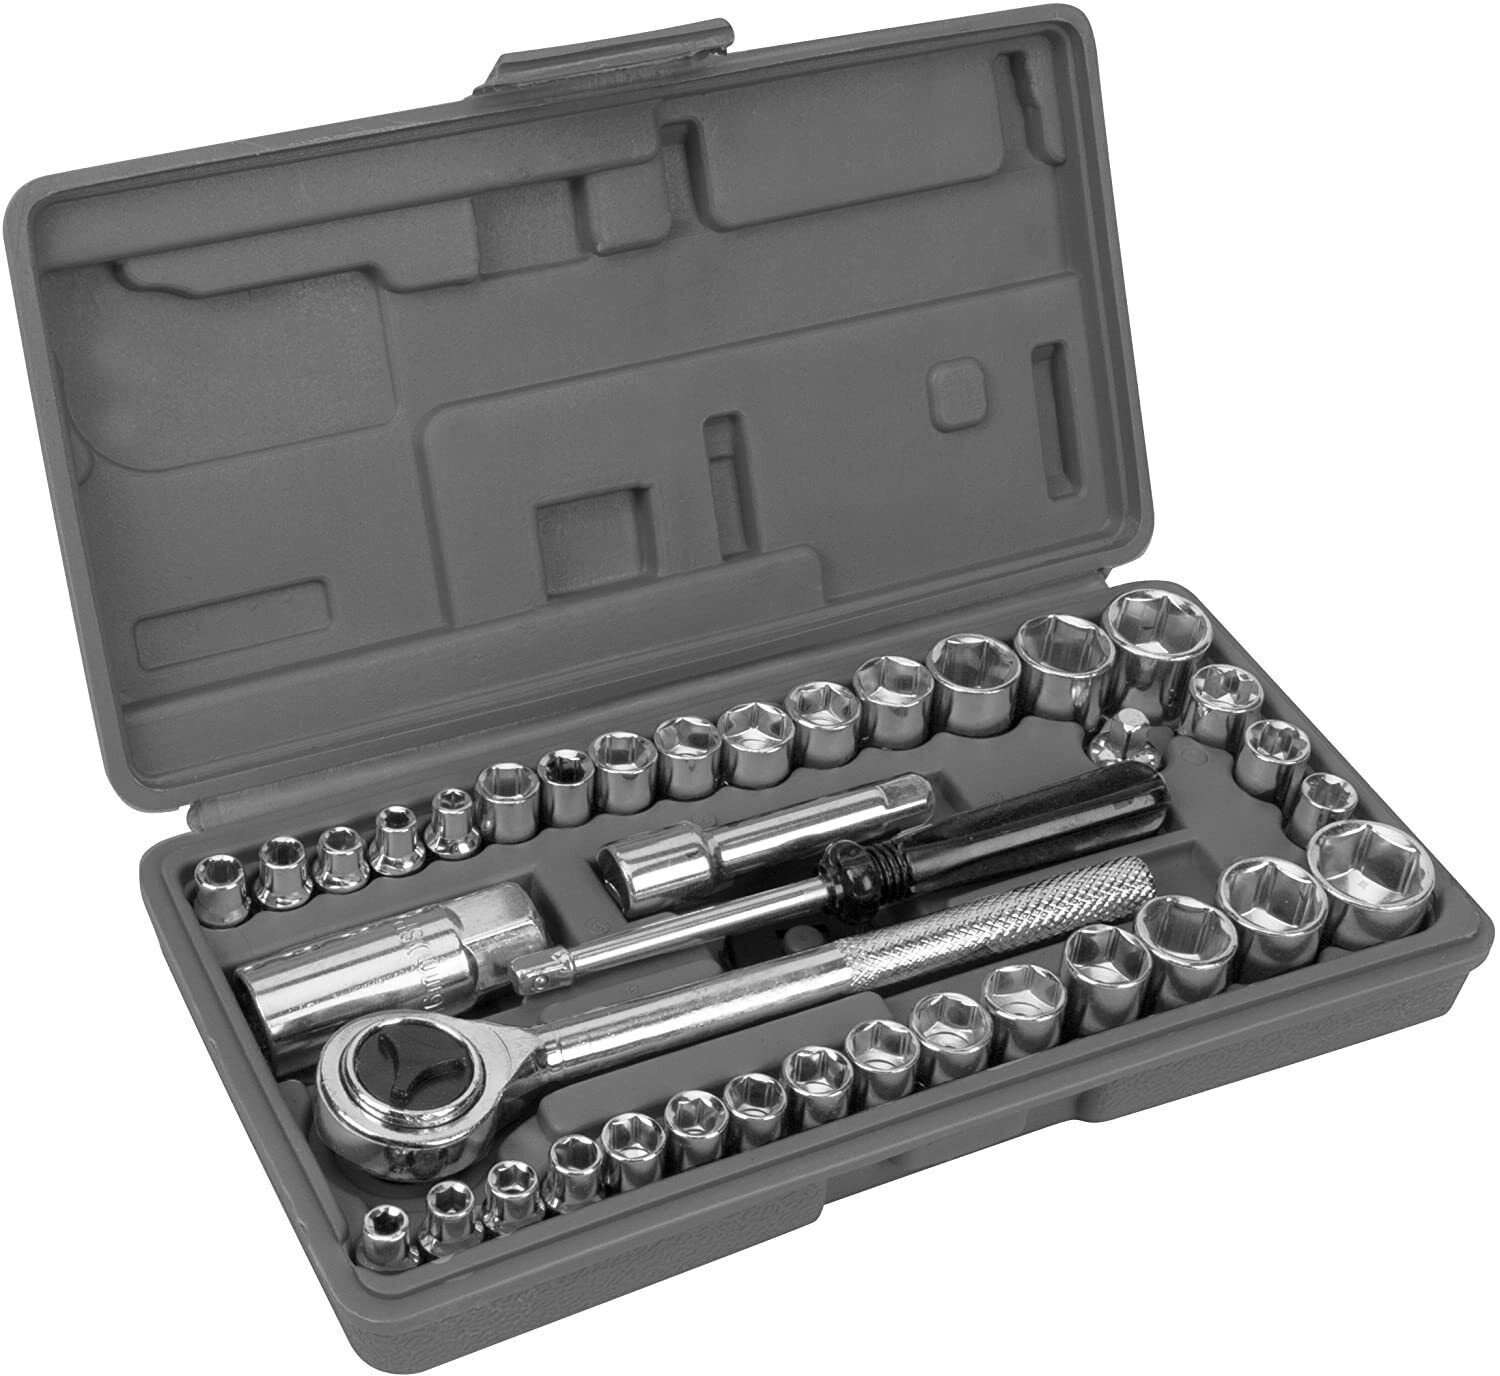 40 Pc SAE/METRIC 1/4" & 3/8" DR. Socket Set Ratchet Wrench with Case Hand Tools 